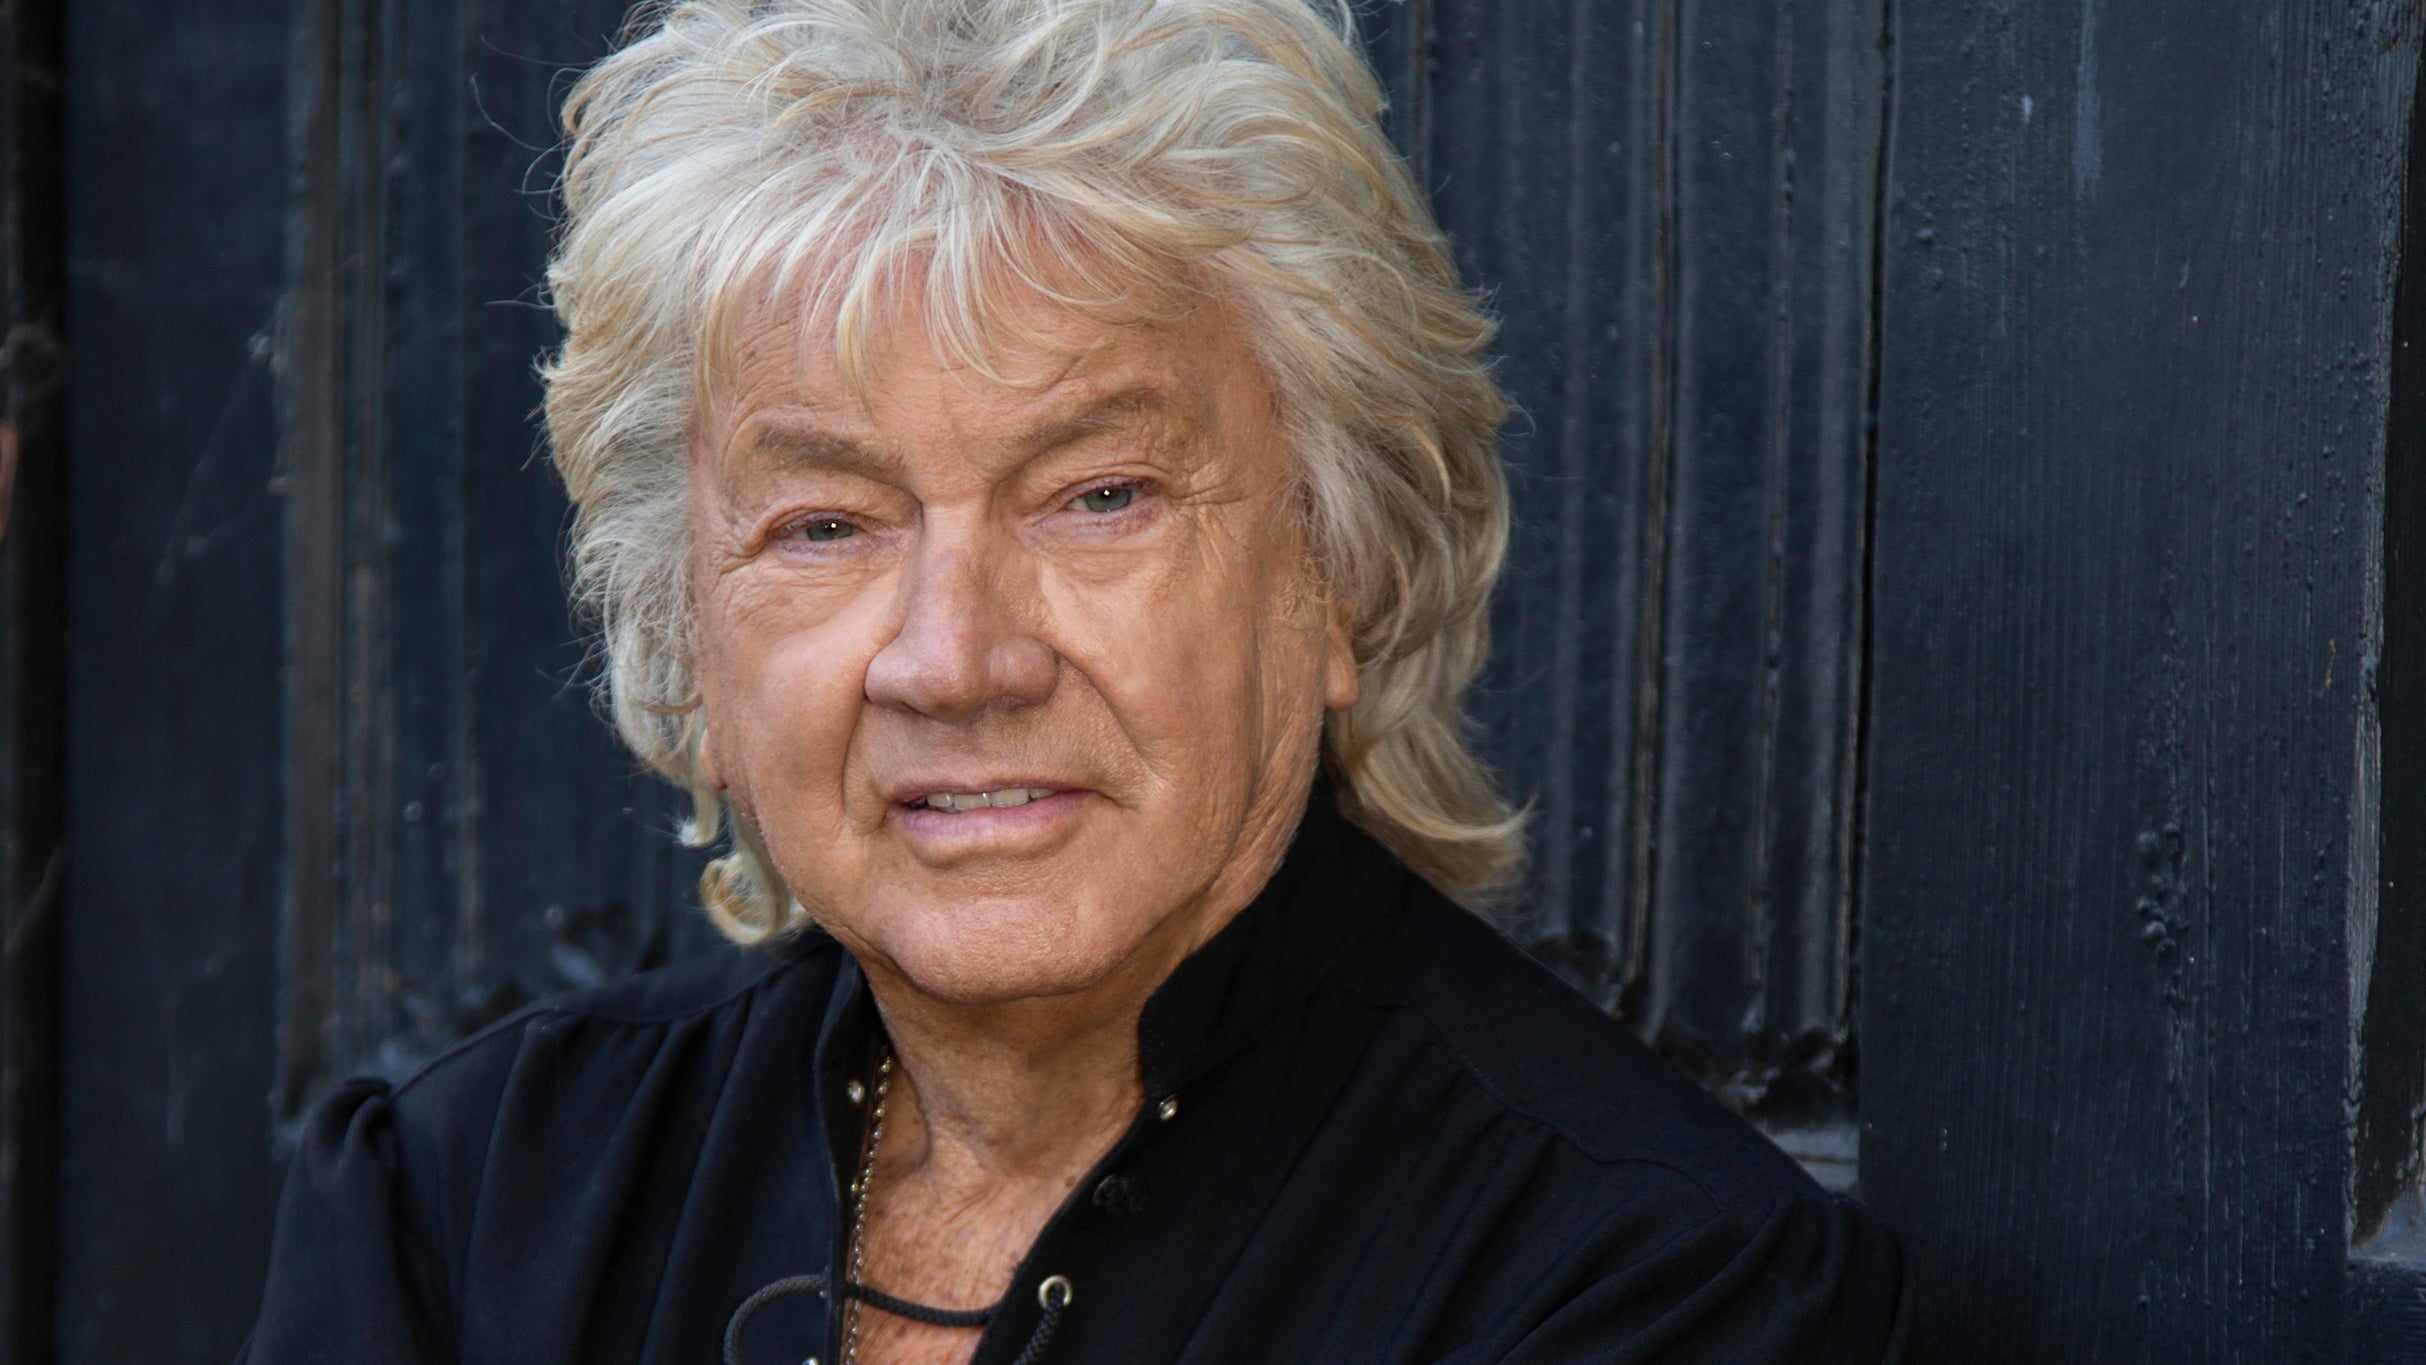 The Moody Blues' John Lodge in Ft Lauderdale promo photo for VIP Package Onsale presale offer code